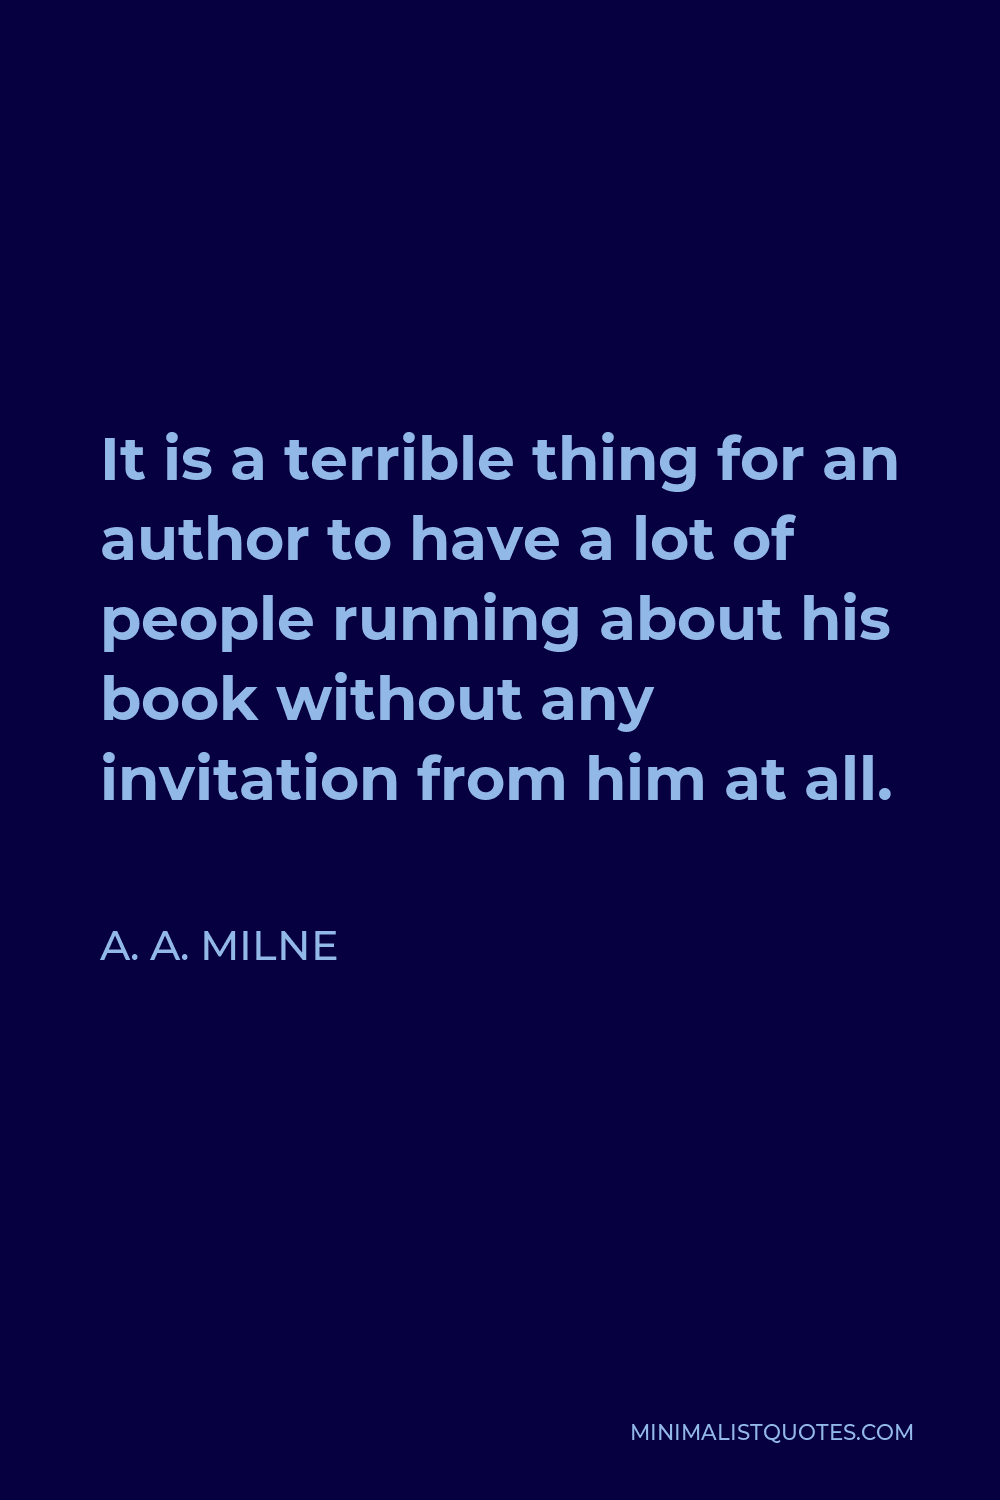 A. A. Milne Quote - It is a terrible thing for an author to have a lot of people running about his book without any invitation from him at all.